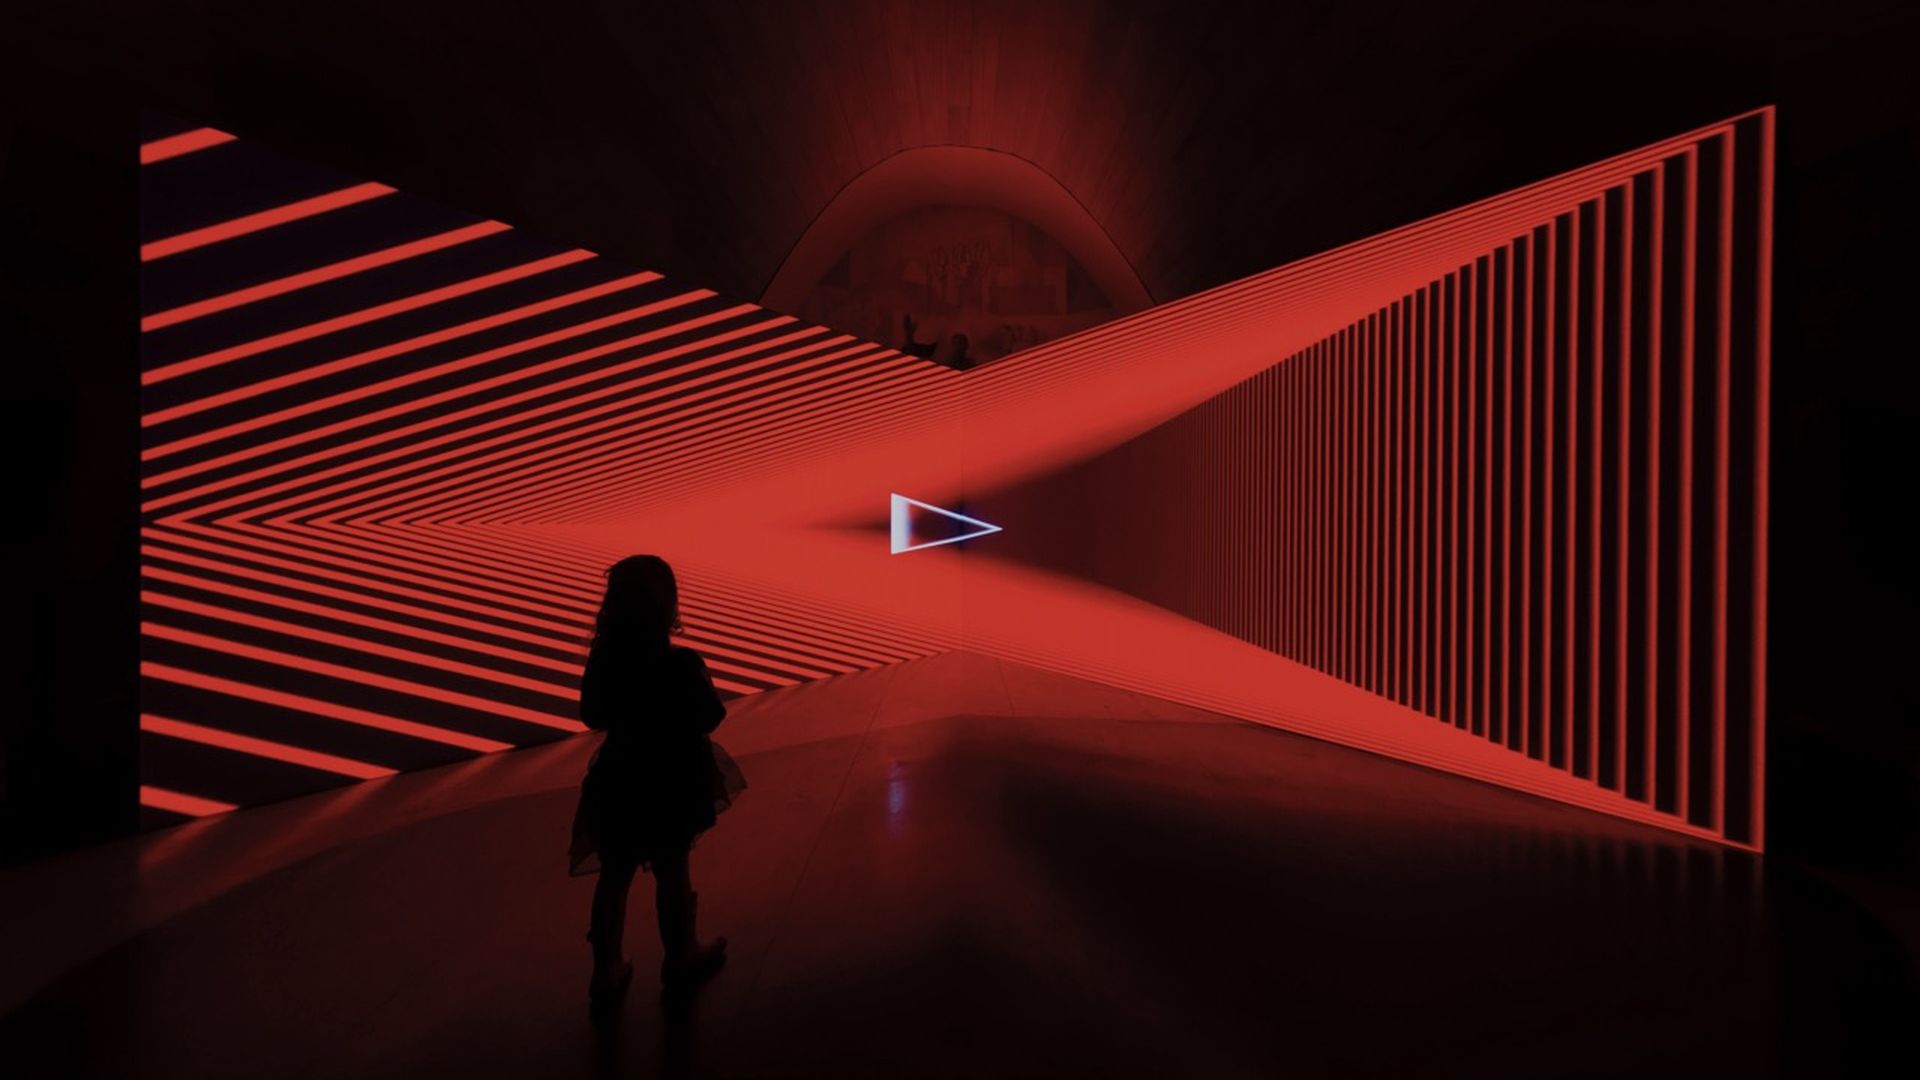 View of a red laser art installation with a girl standing in front of it.